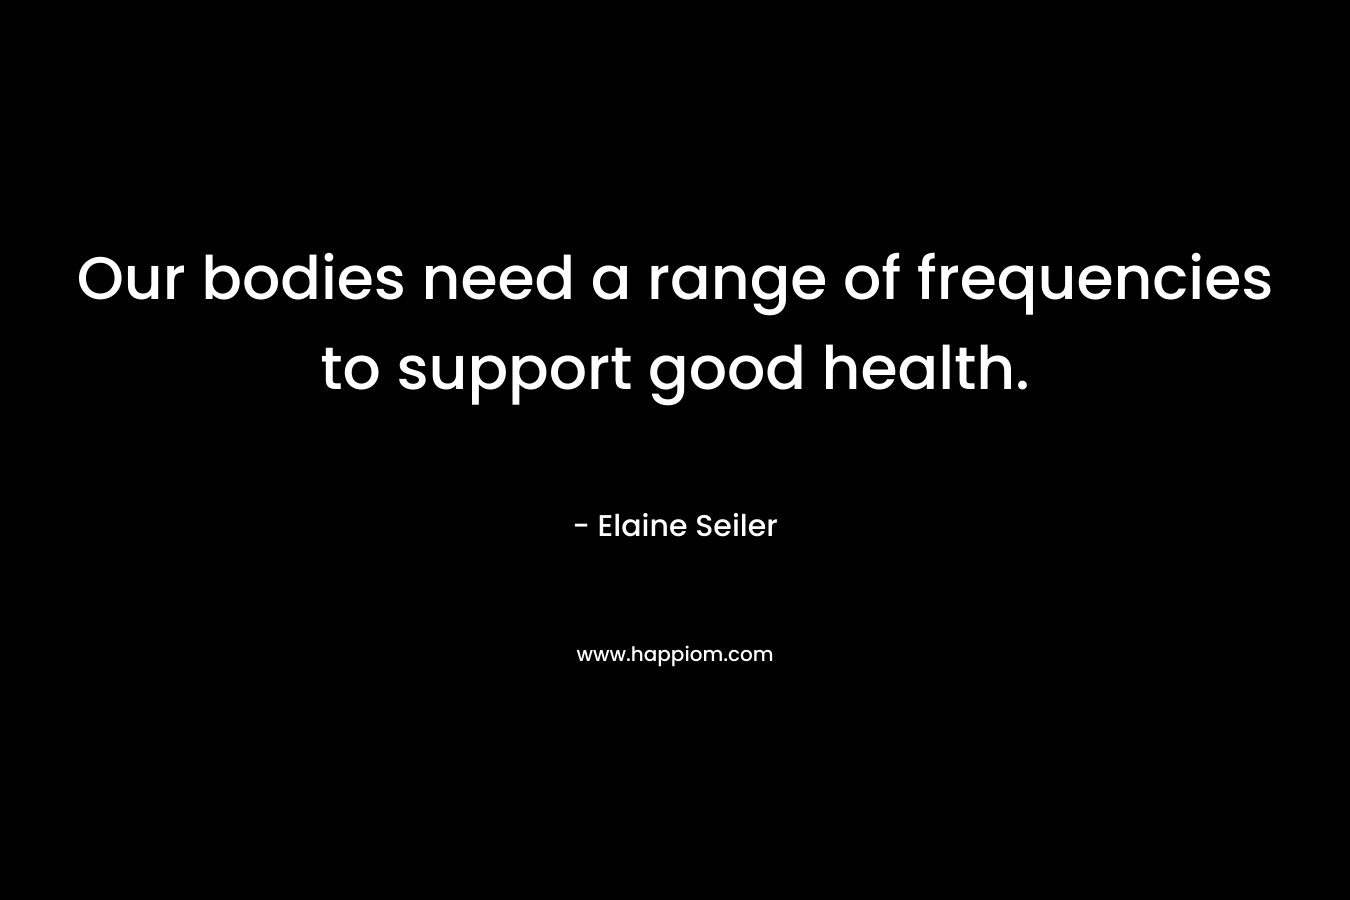 Our bodies need a range of frequencies to support good health. – Elaine Seiler